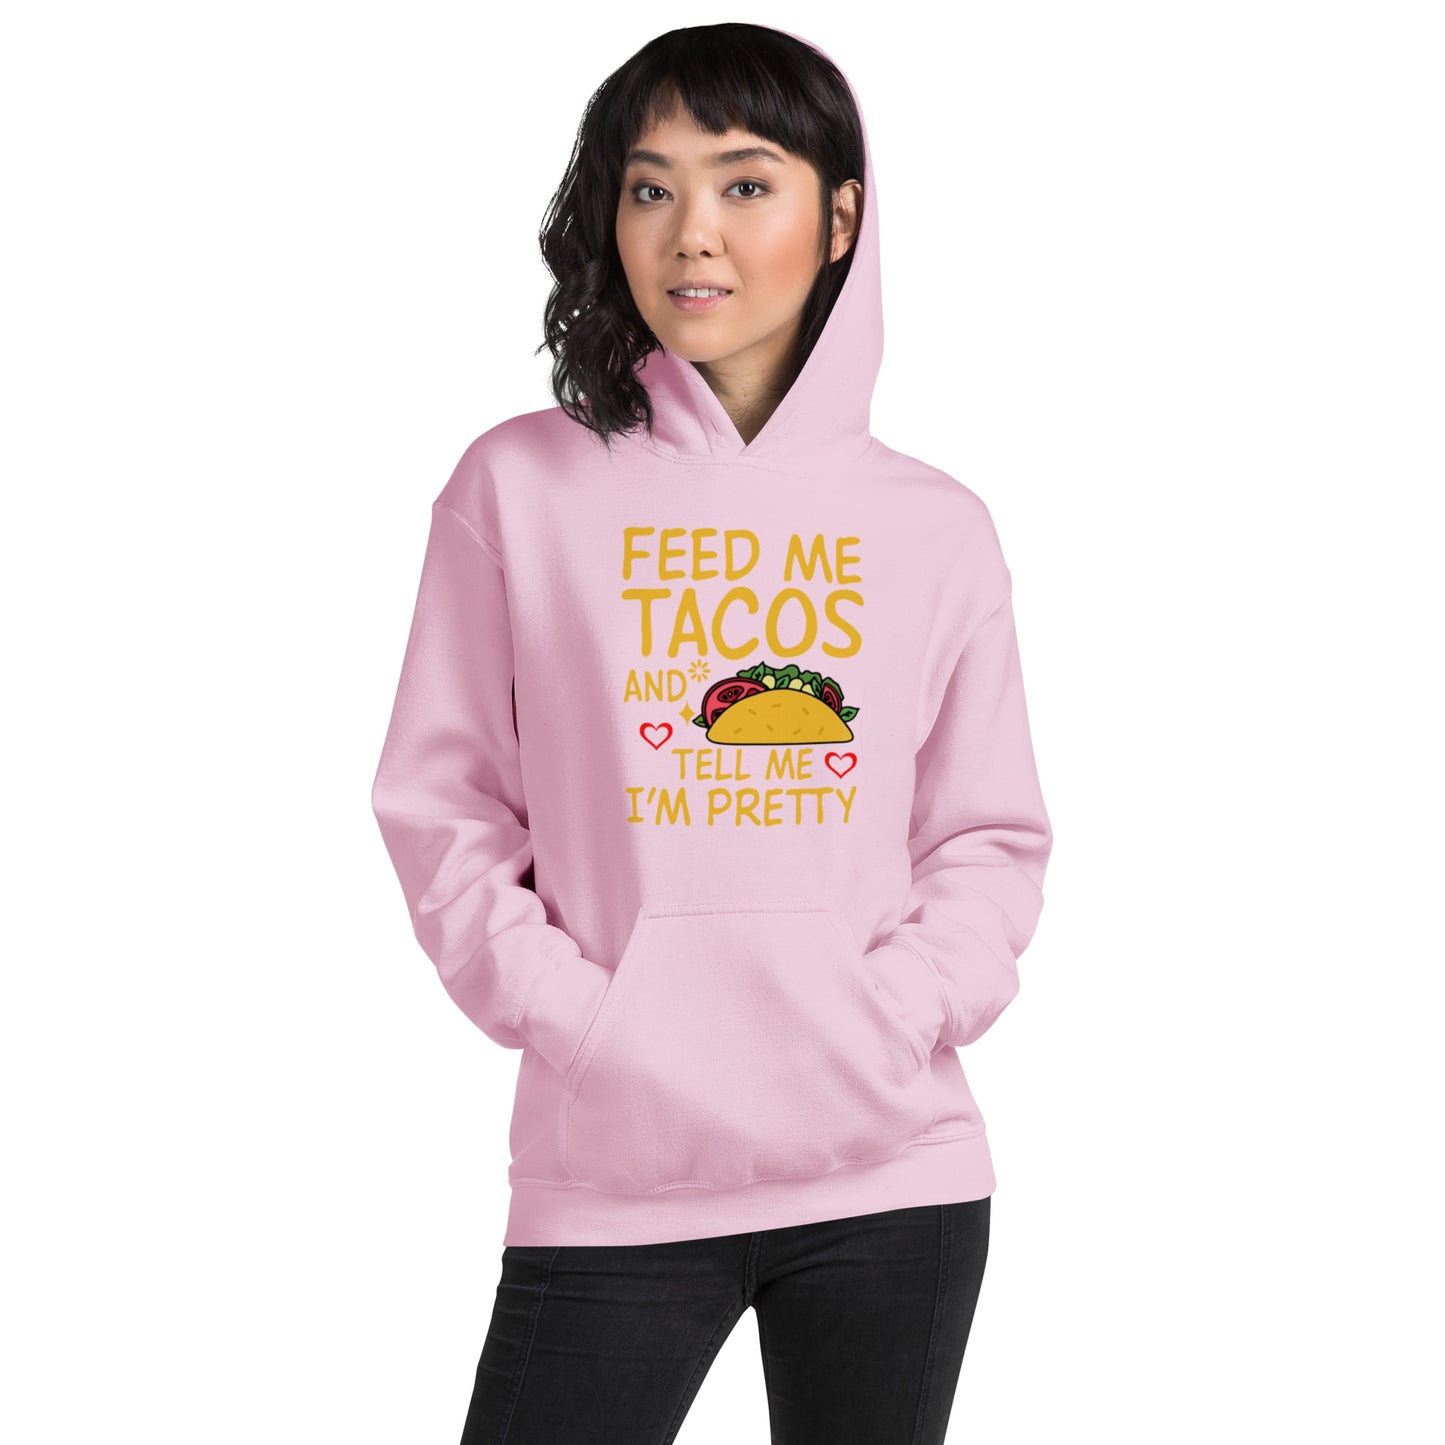 Feed Me Tacos and Tell Me I'm Pretty Unisex Hoodie